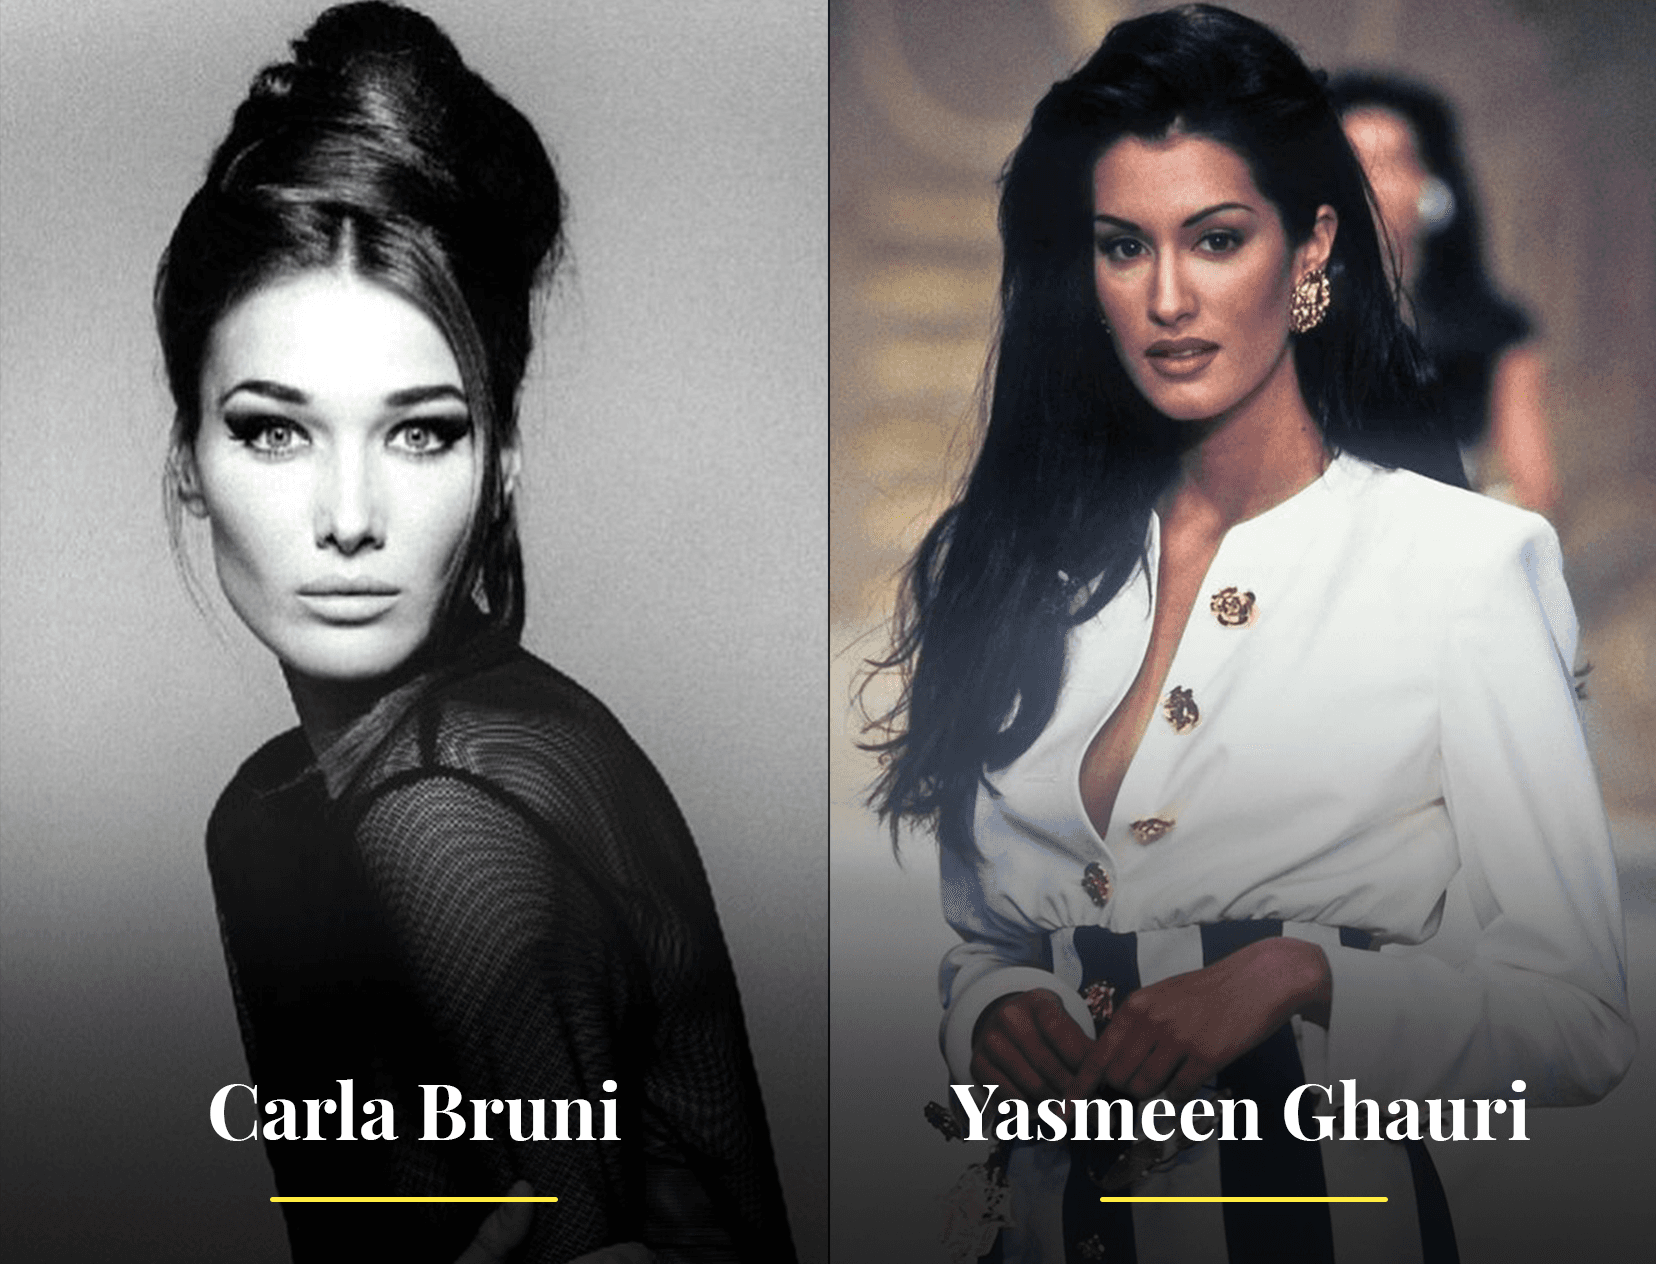 20 Pictures Of 90s Supermodels To Remind Us All Of The Good Ol&#8217; Days